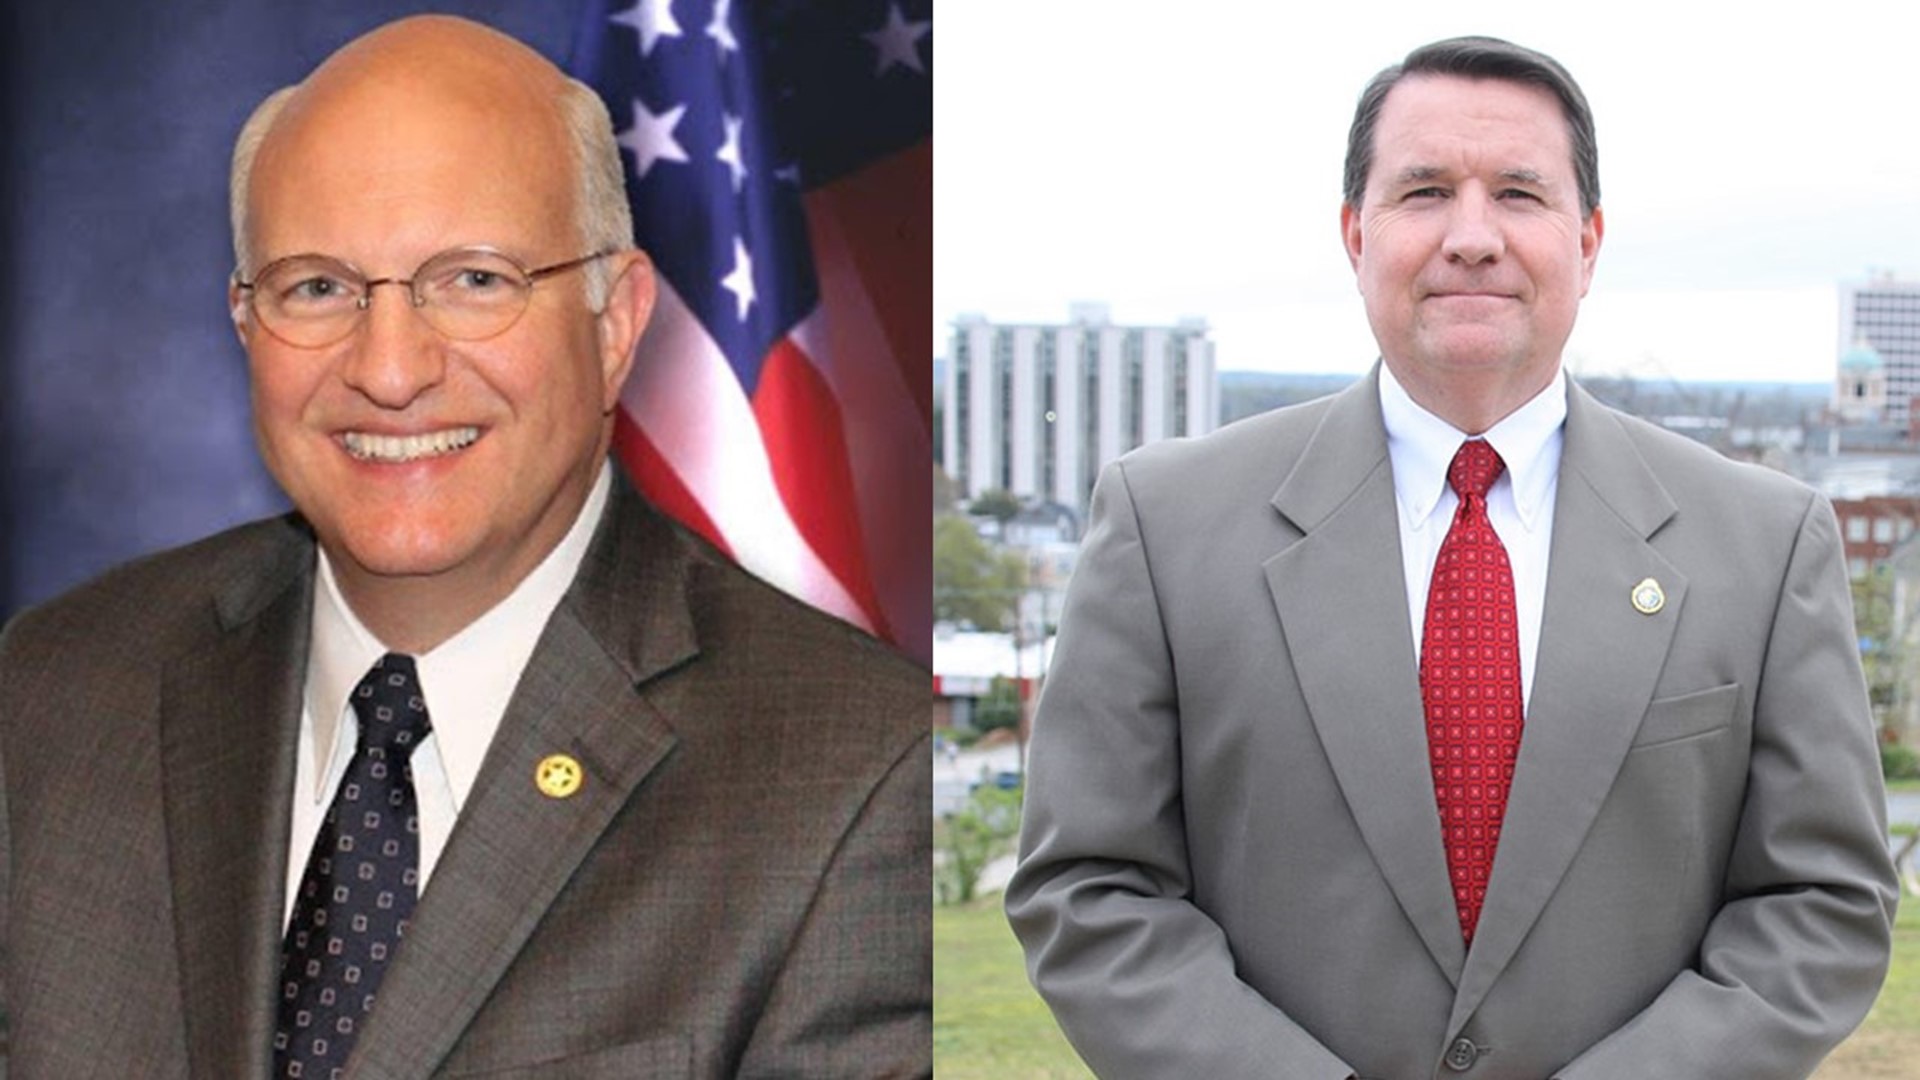 This November, former GBI Agent in Charge JT Ricketson is challenging Bibb County Sheriff David Davis.